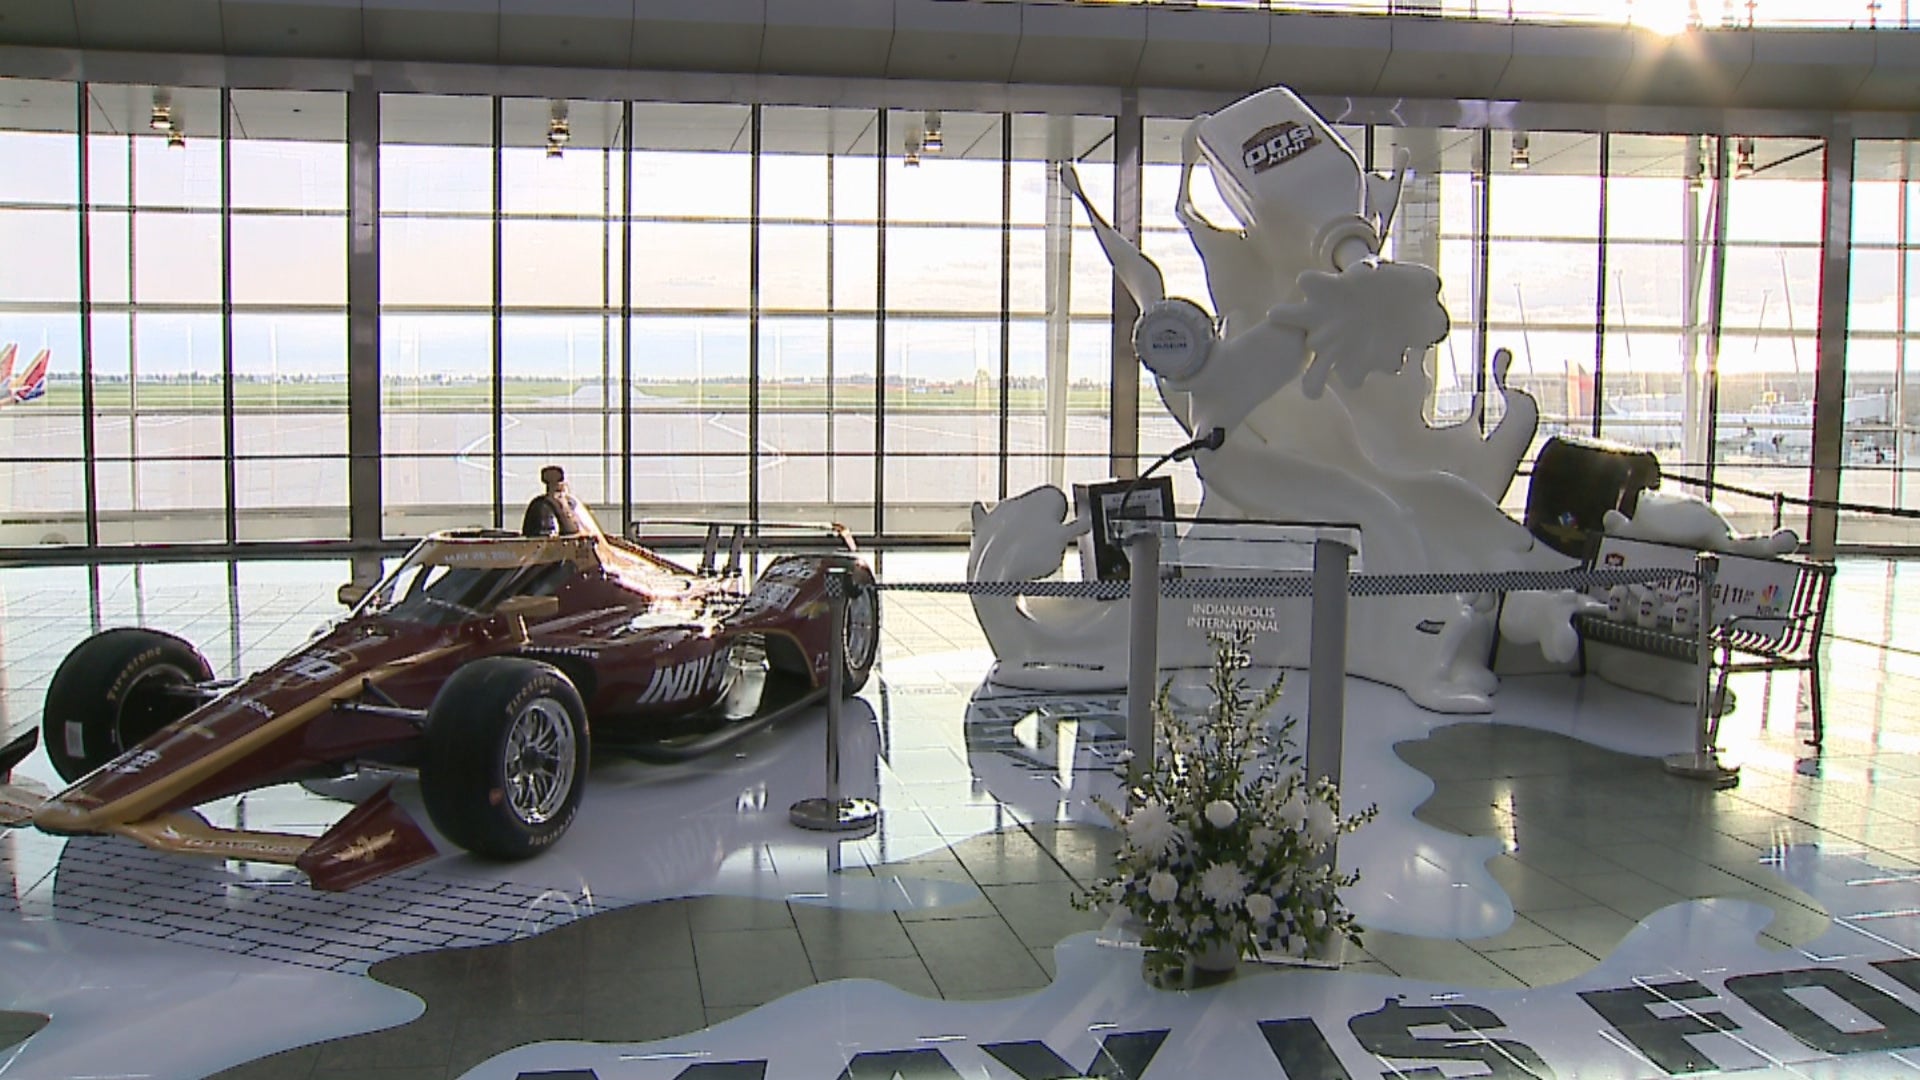 IND airport sculpture celebrates what Indy 500 winners drink